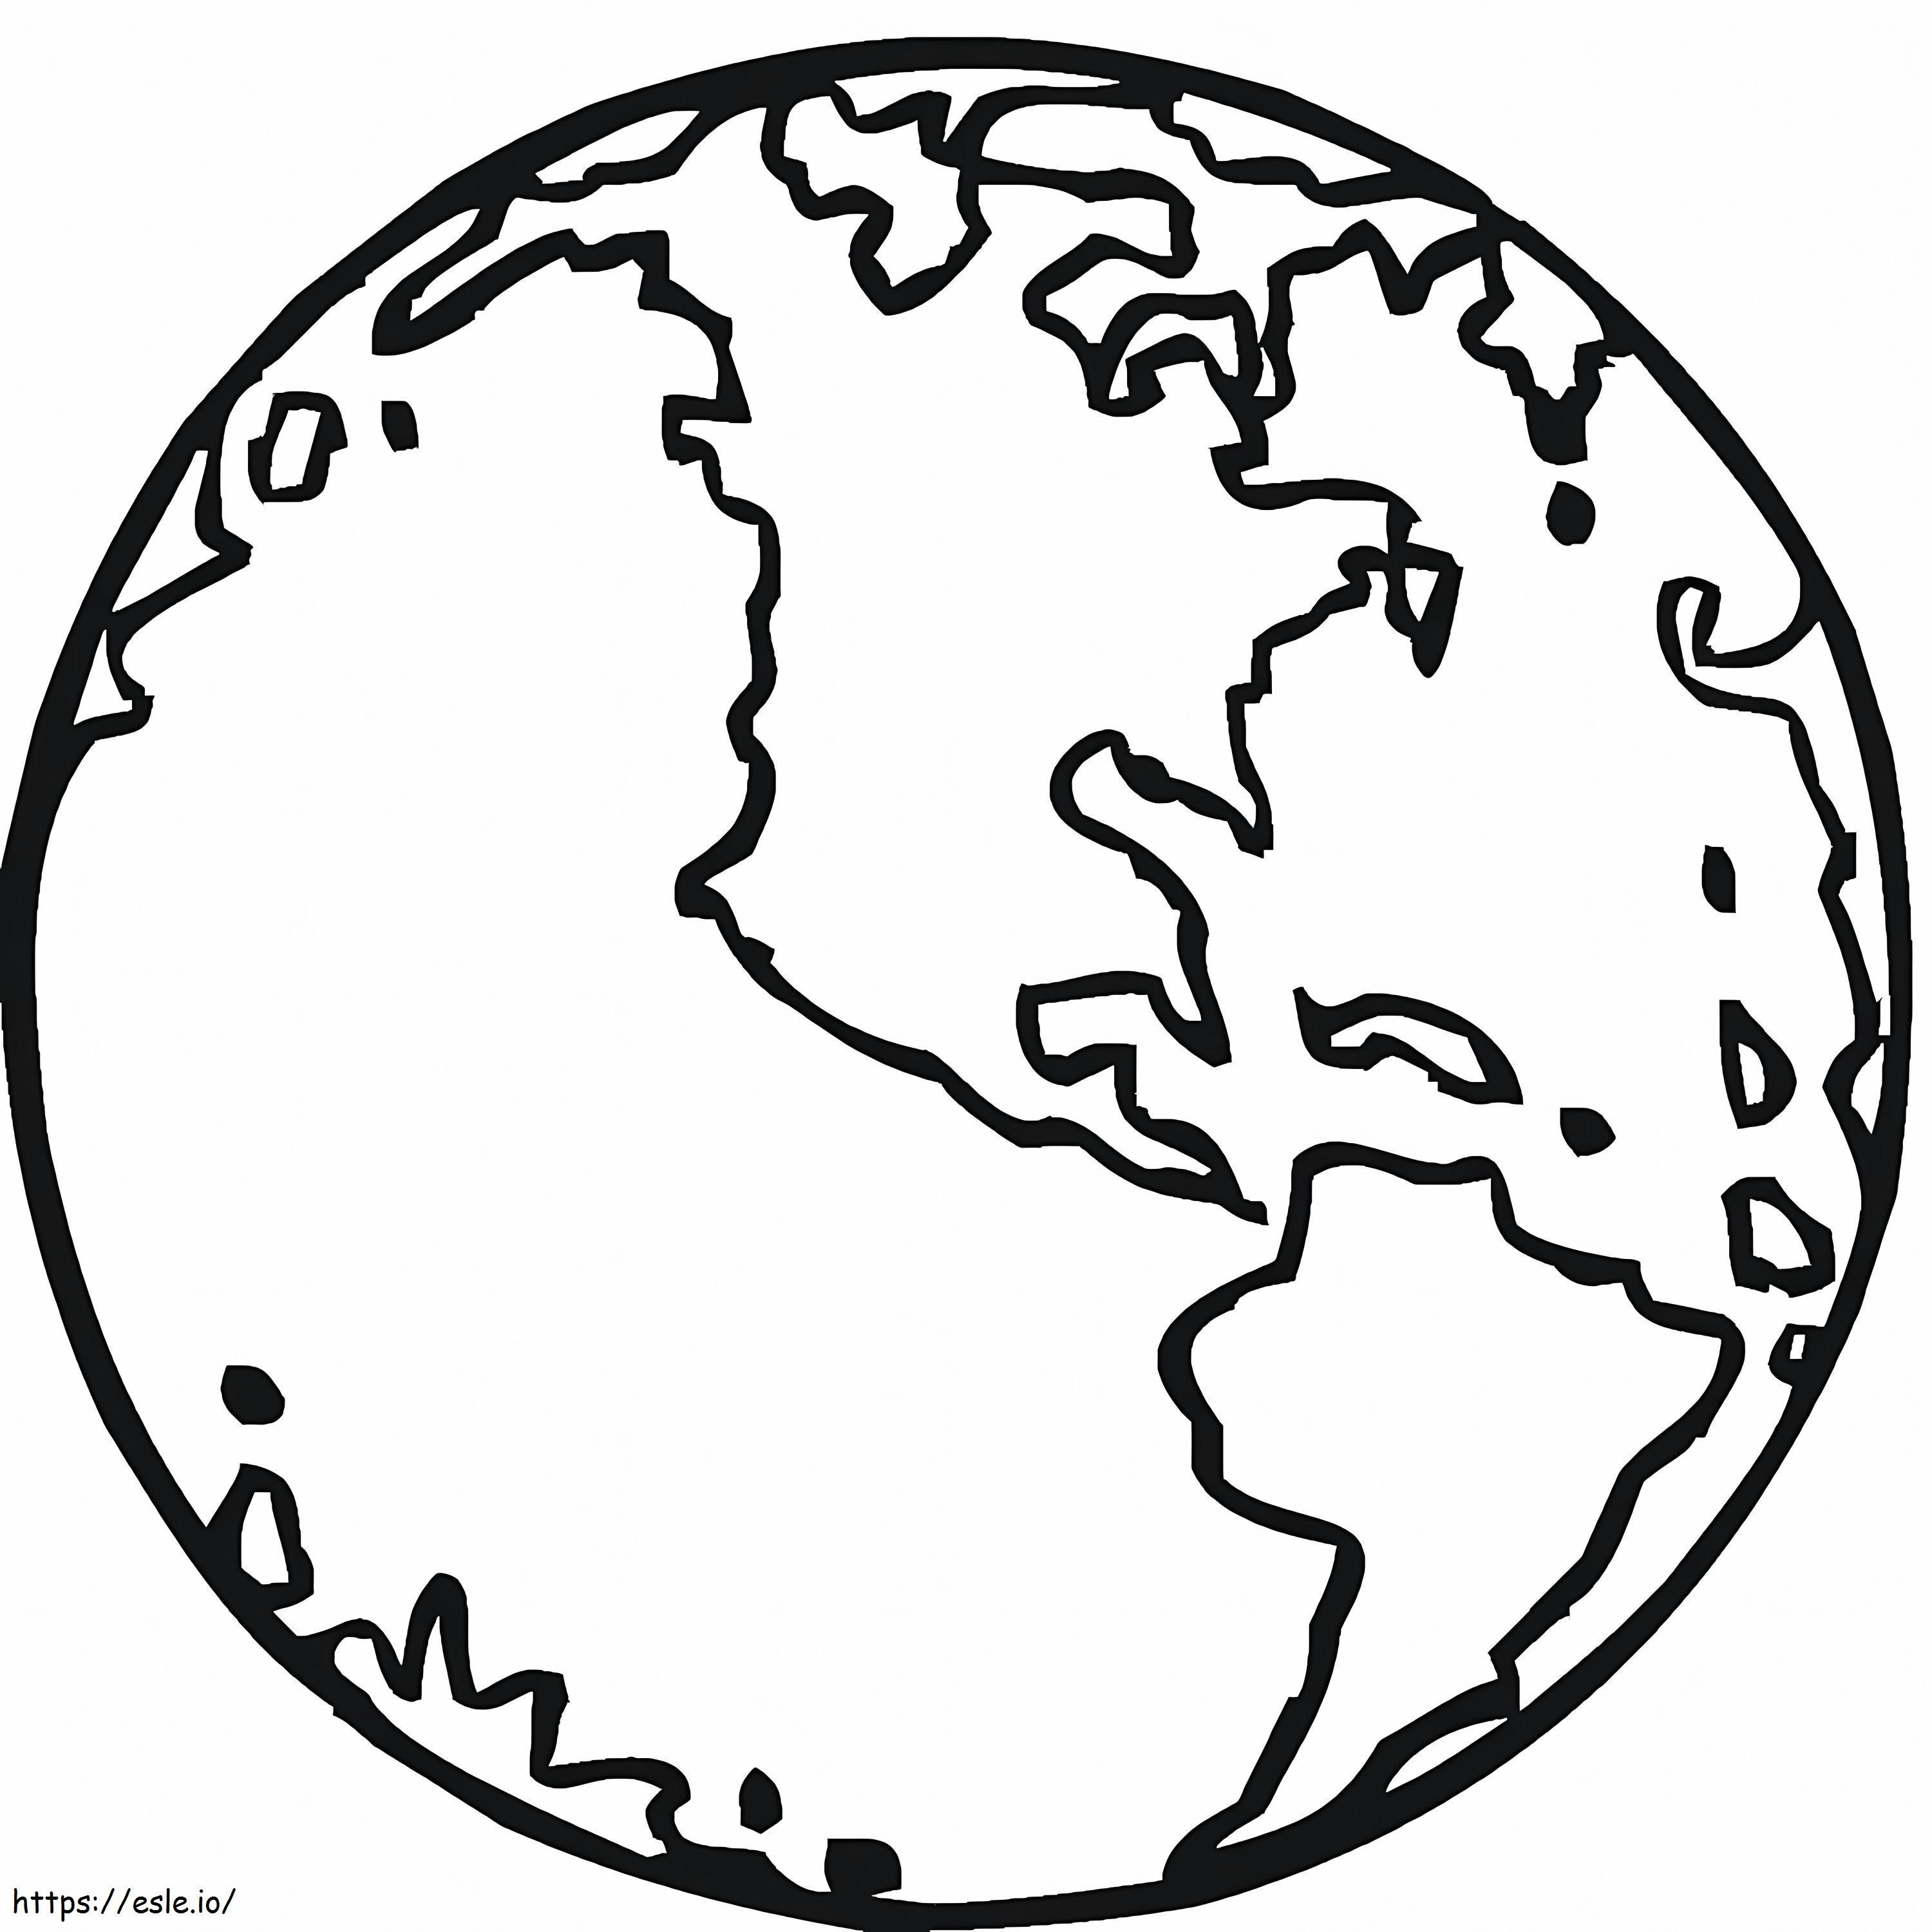 Great Earth coloring page